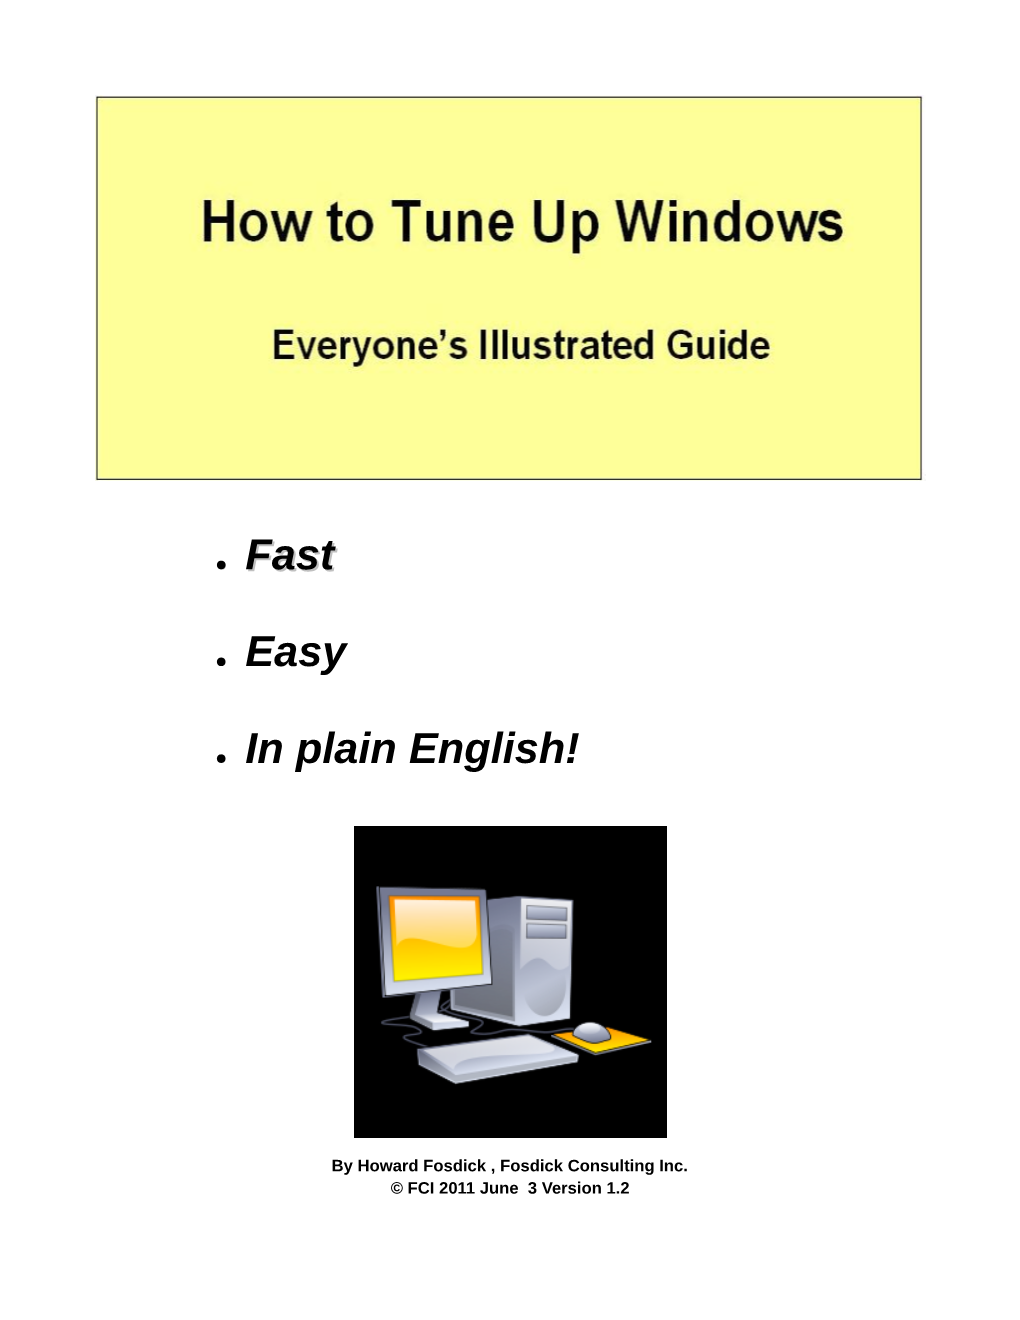 How to Tune up Windows